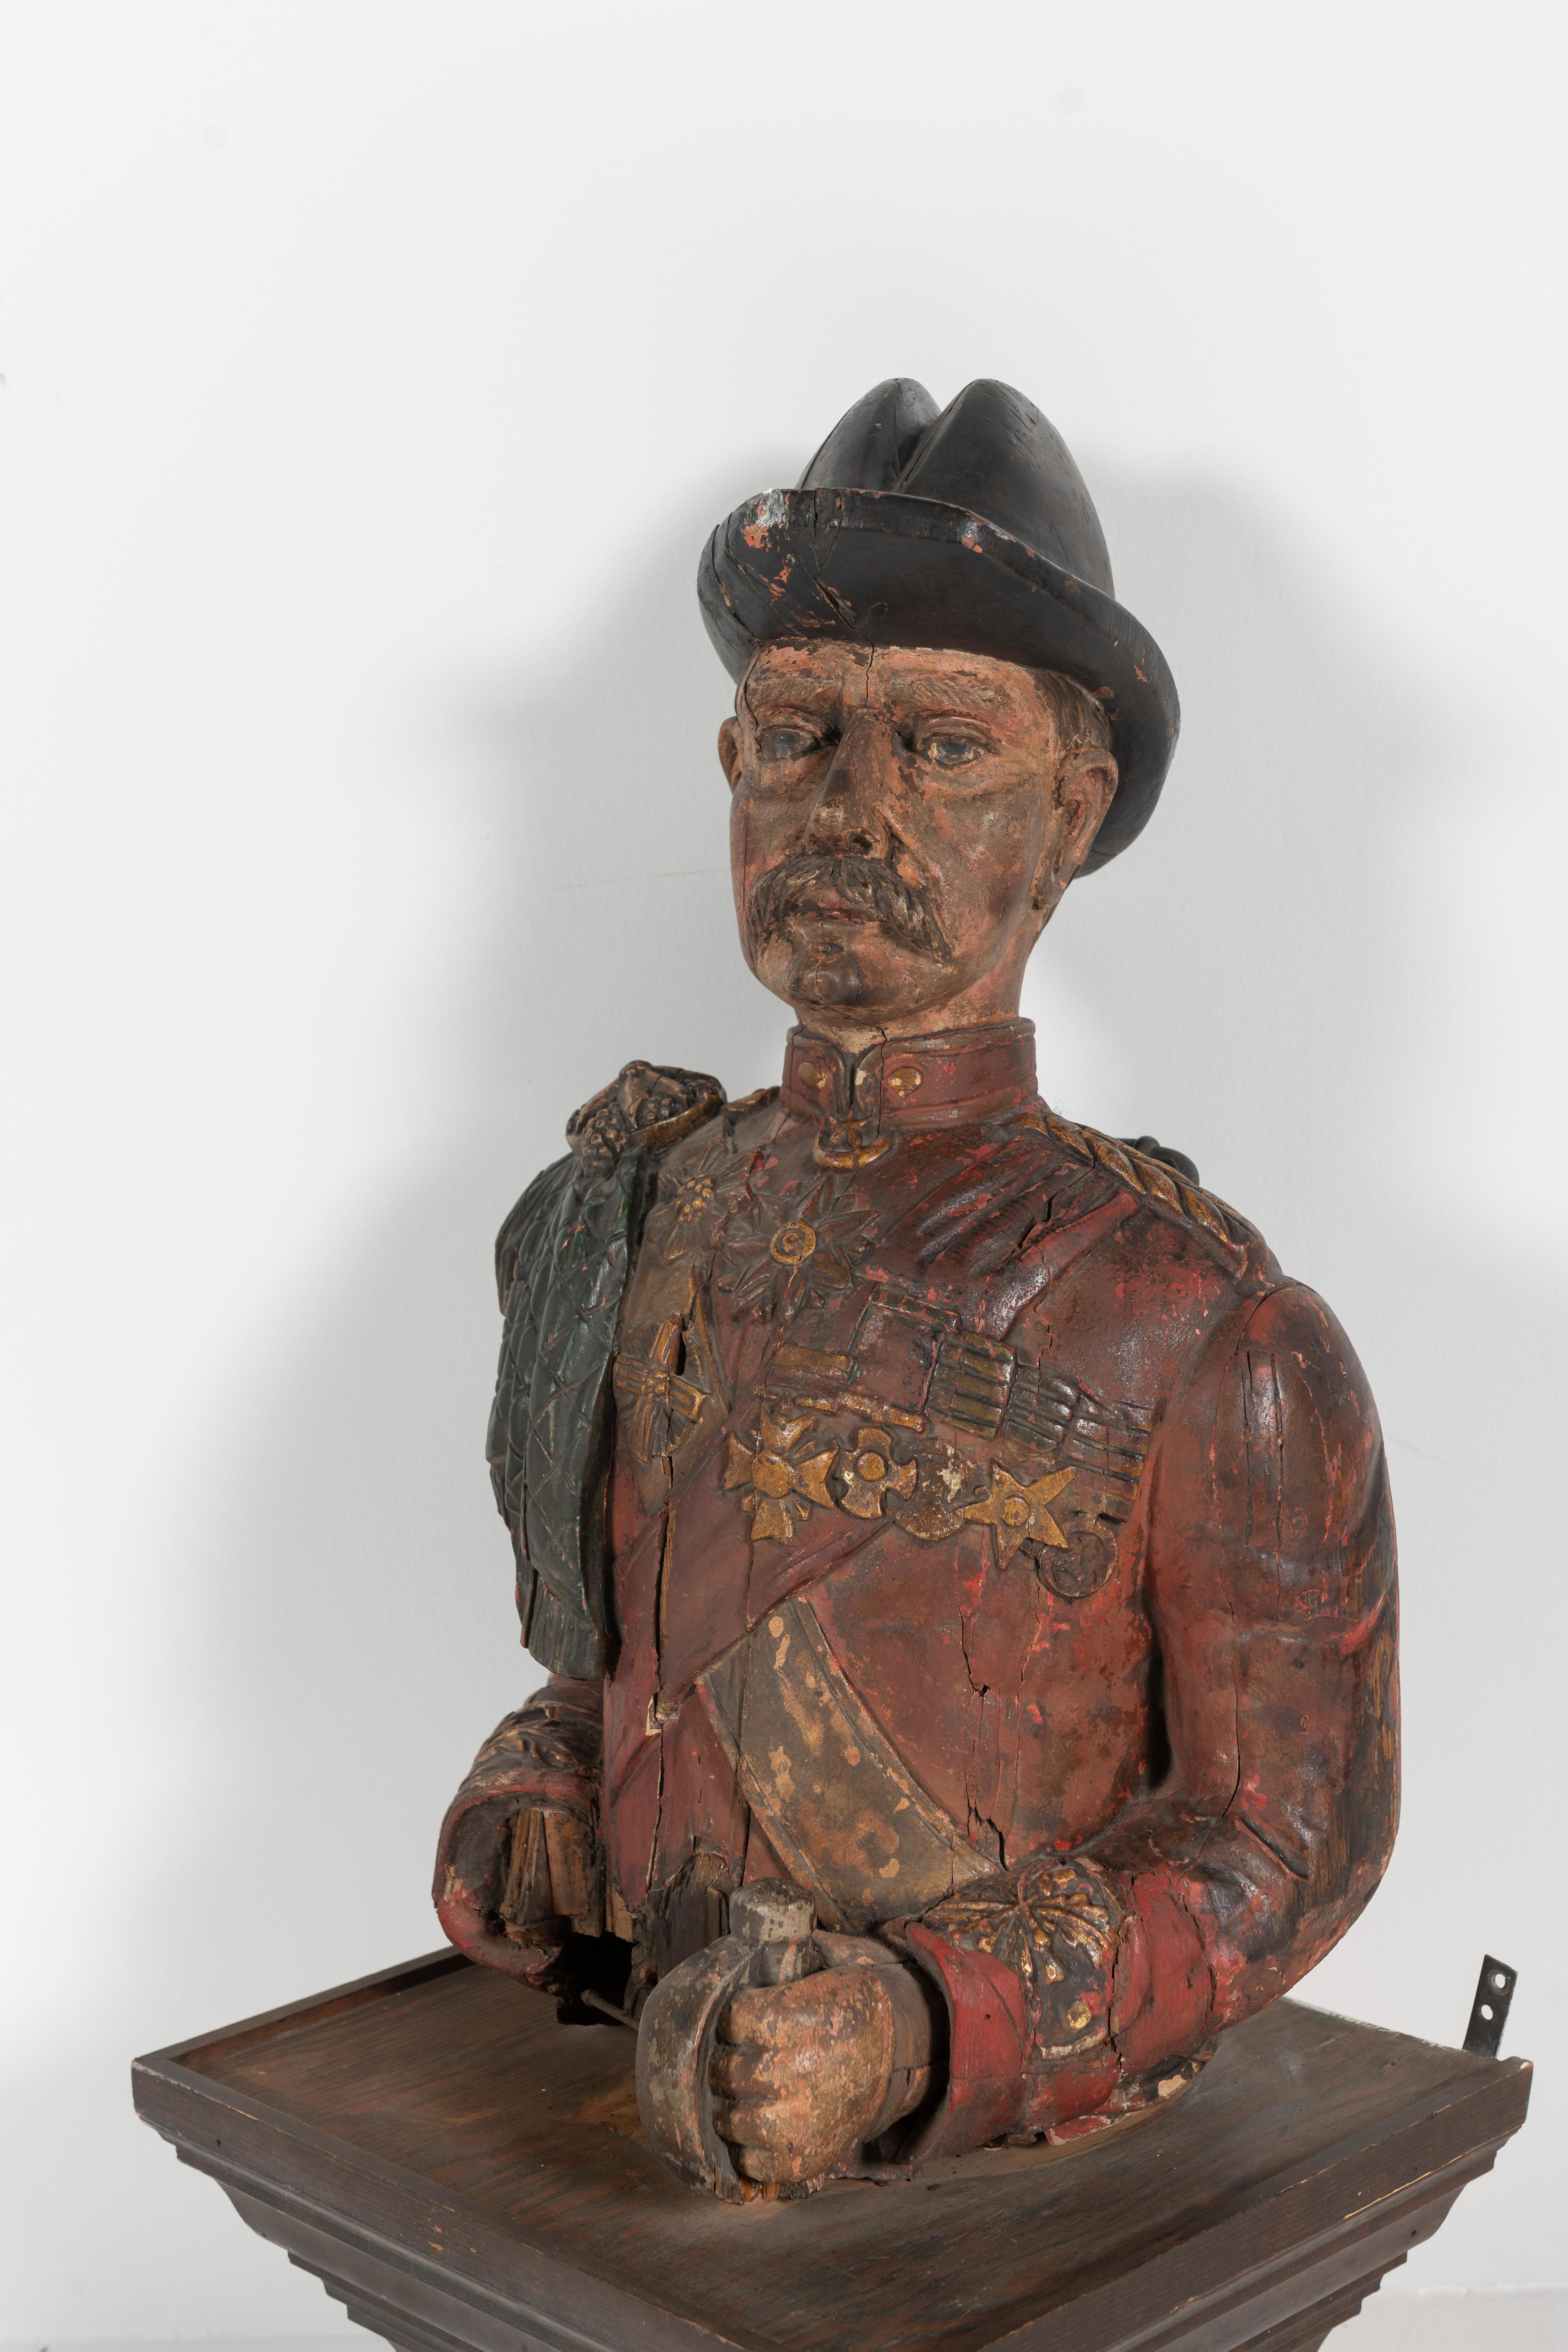 Possibly from a ship, this rare antique late 19th Century English bust is carved and painted, representing a branch of the military. Portrayed in dress or formal uniform. Interesting sculptural addition to your space. Adapted to hang on a wall.